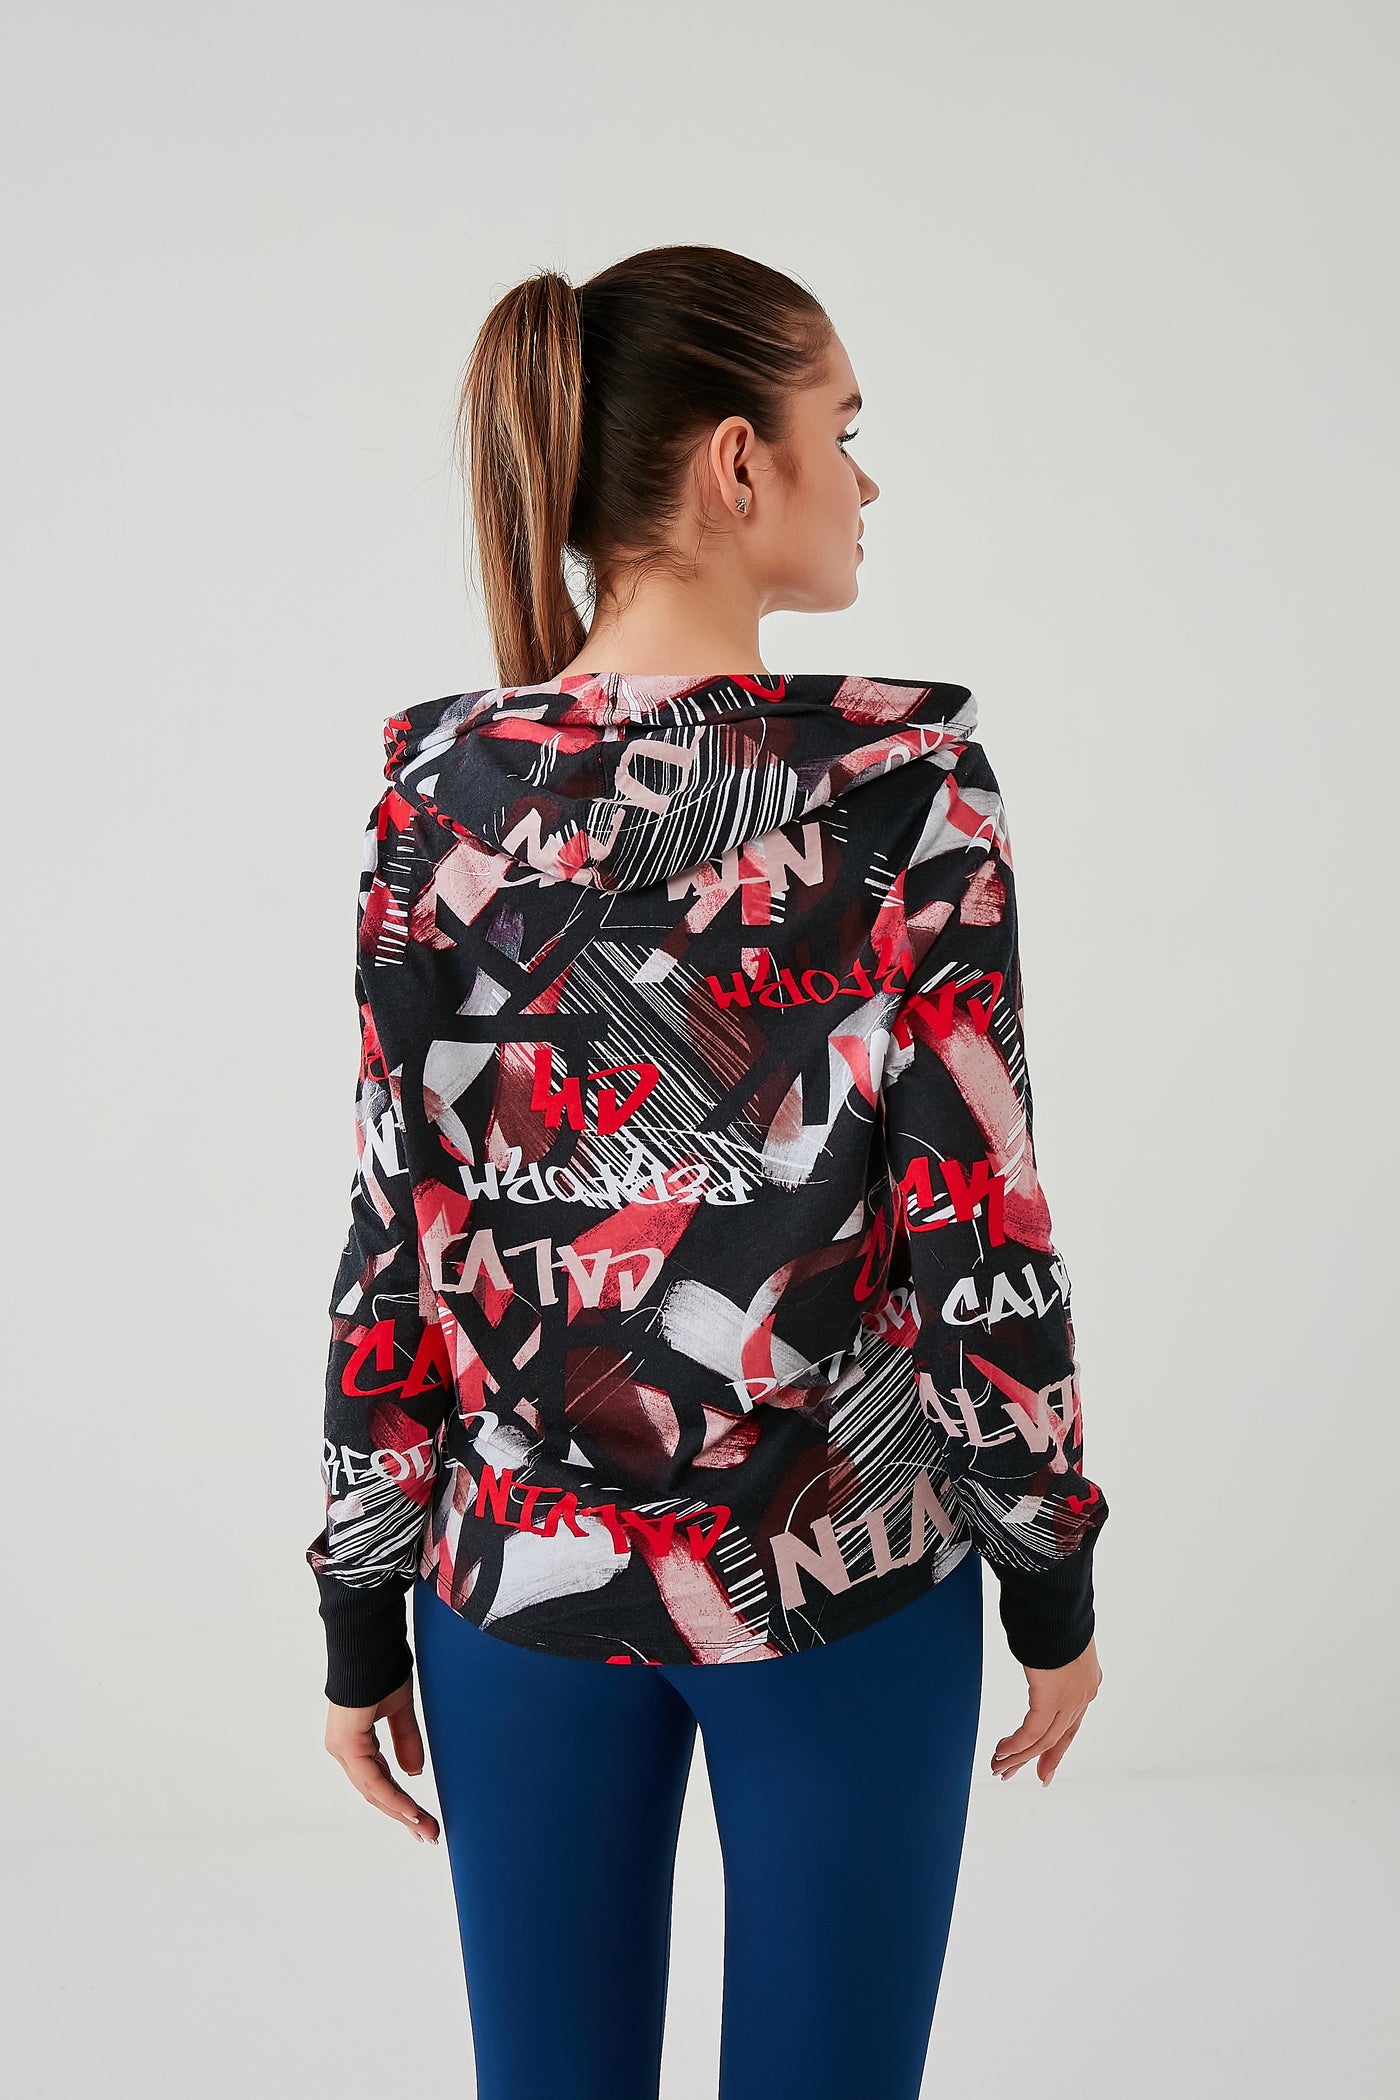 Calvin Klein women's jacket in red and black